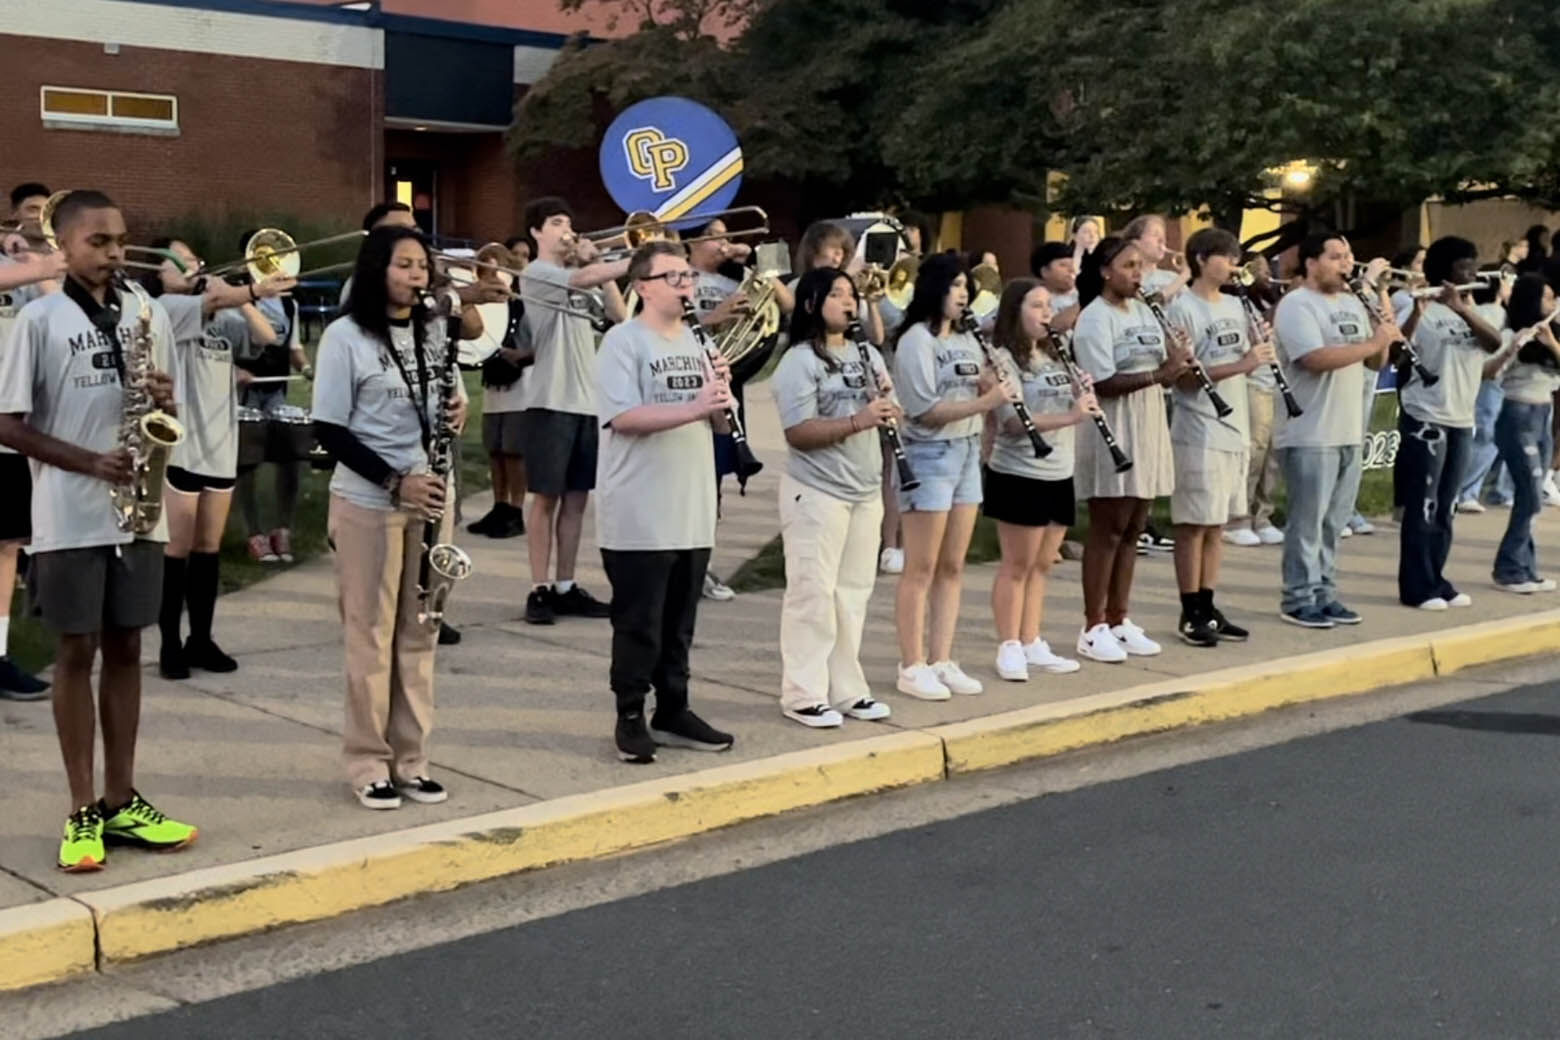 Students at Osbourn Park High School, the only high school in Manassas City, were up bright and early for a schoolwide pep rally at 6 a.m. (WTOP/Nick Iannelli)